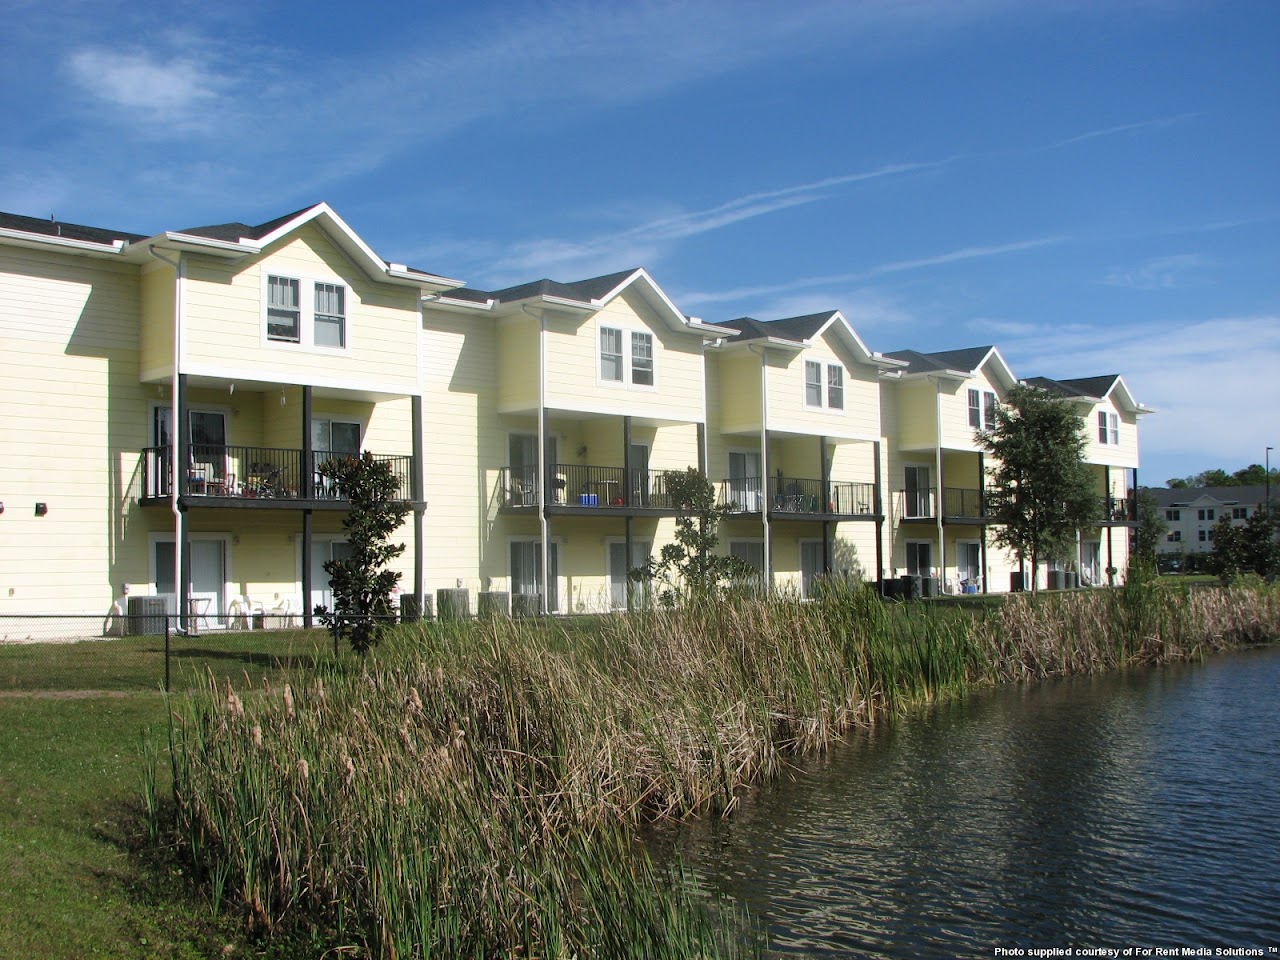 Photo of SUMMER BREEZE AT SUMMERSET VILLAGE. Affordable housing located at 305 SUMMER BREEZE WAY ST AUGUSTINE, FL 32086